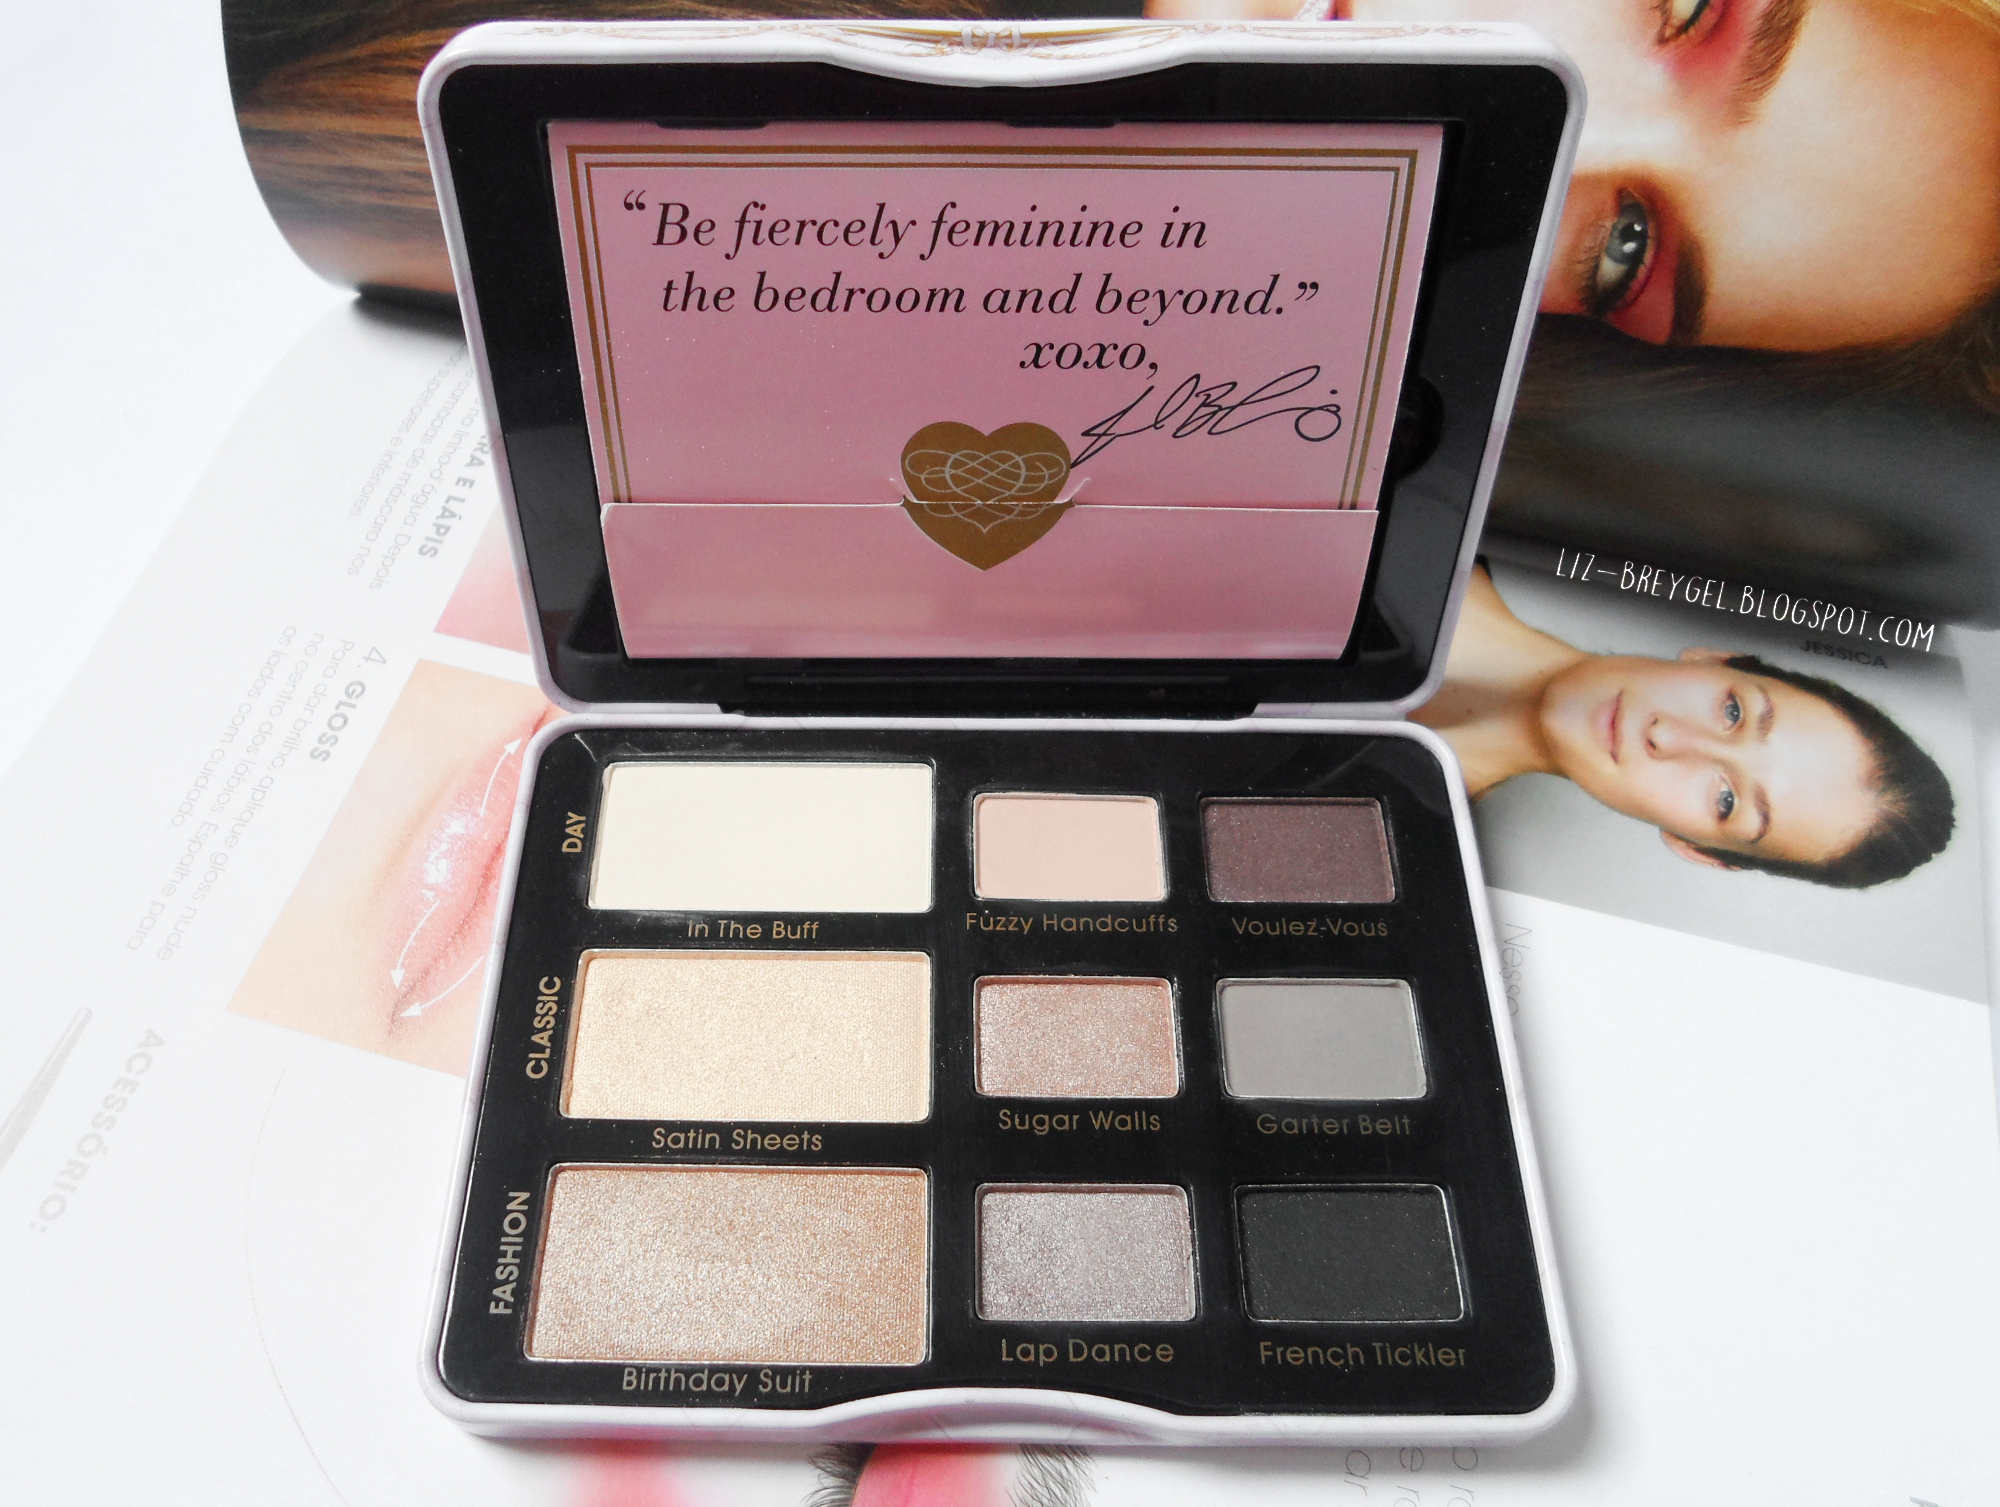 a versatile, day-to-night eyeshadow palette boudoir eyes by too faced cosmetic brand, see the full makeup review with pictures and swatches by blogger Liz Breygel.